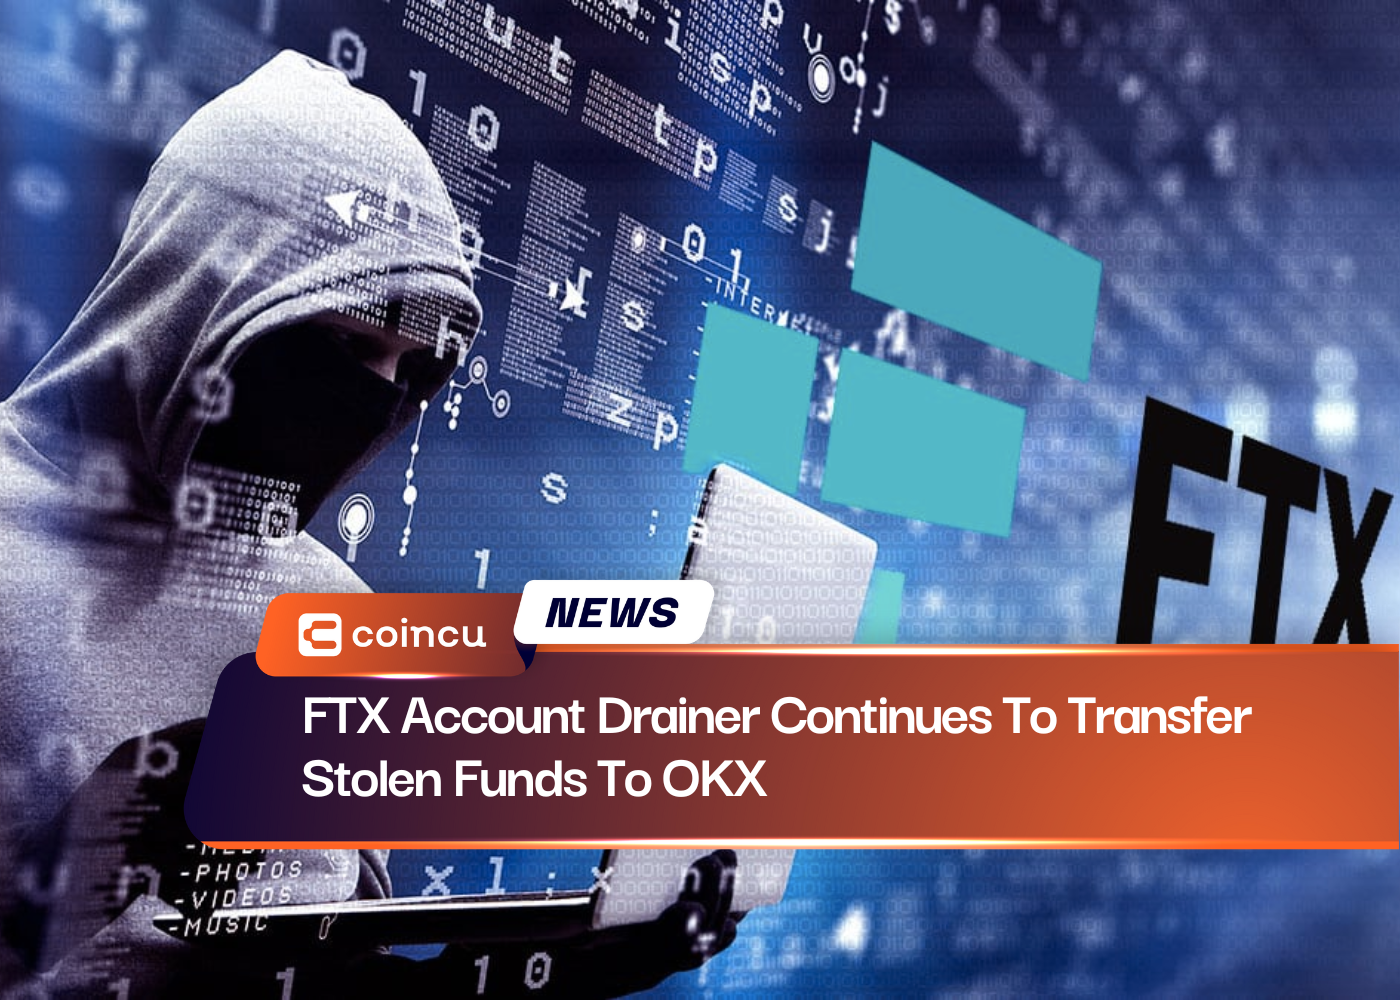 FTX Account Drainer Continues To Transfer Stolen Funds To OKX